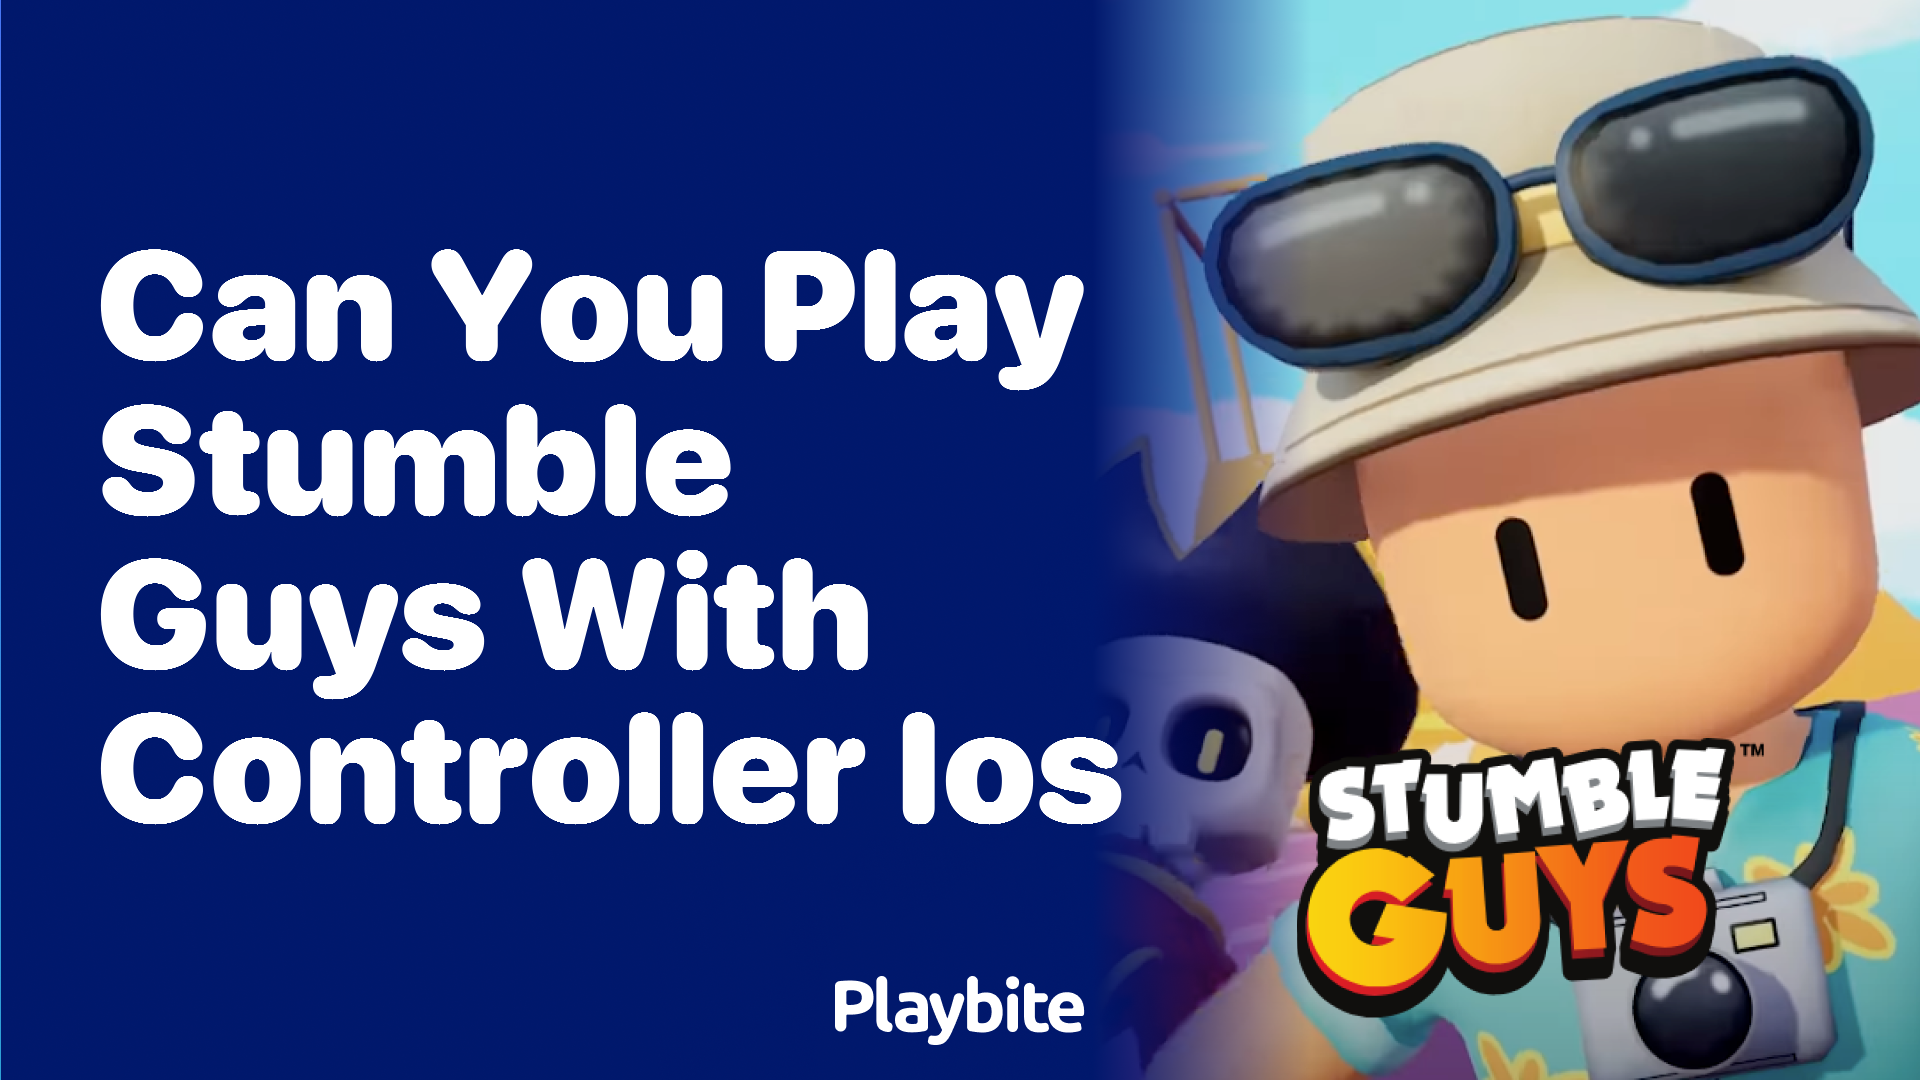 Can You Play Stumble Guys with a Controller on iOS?